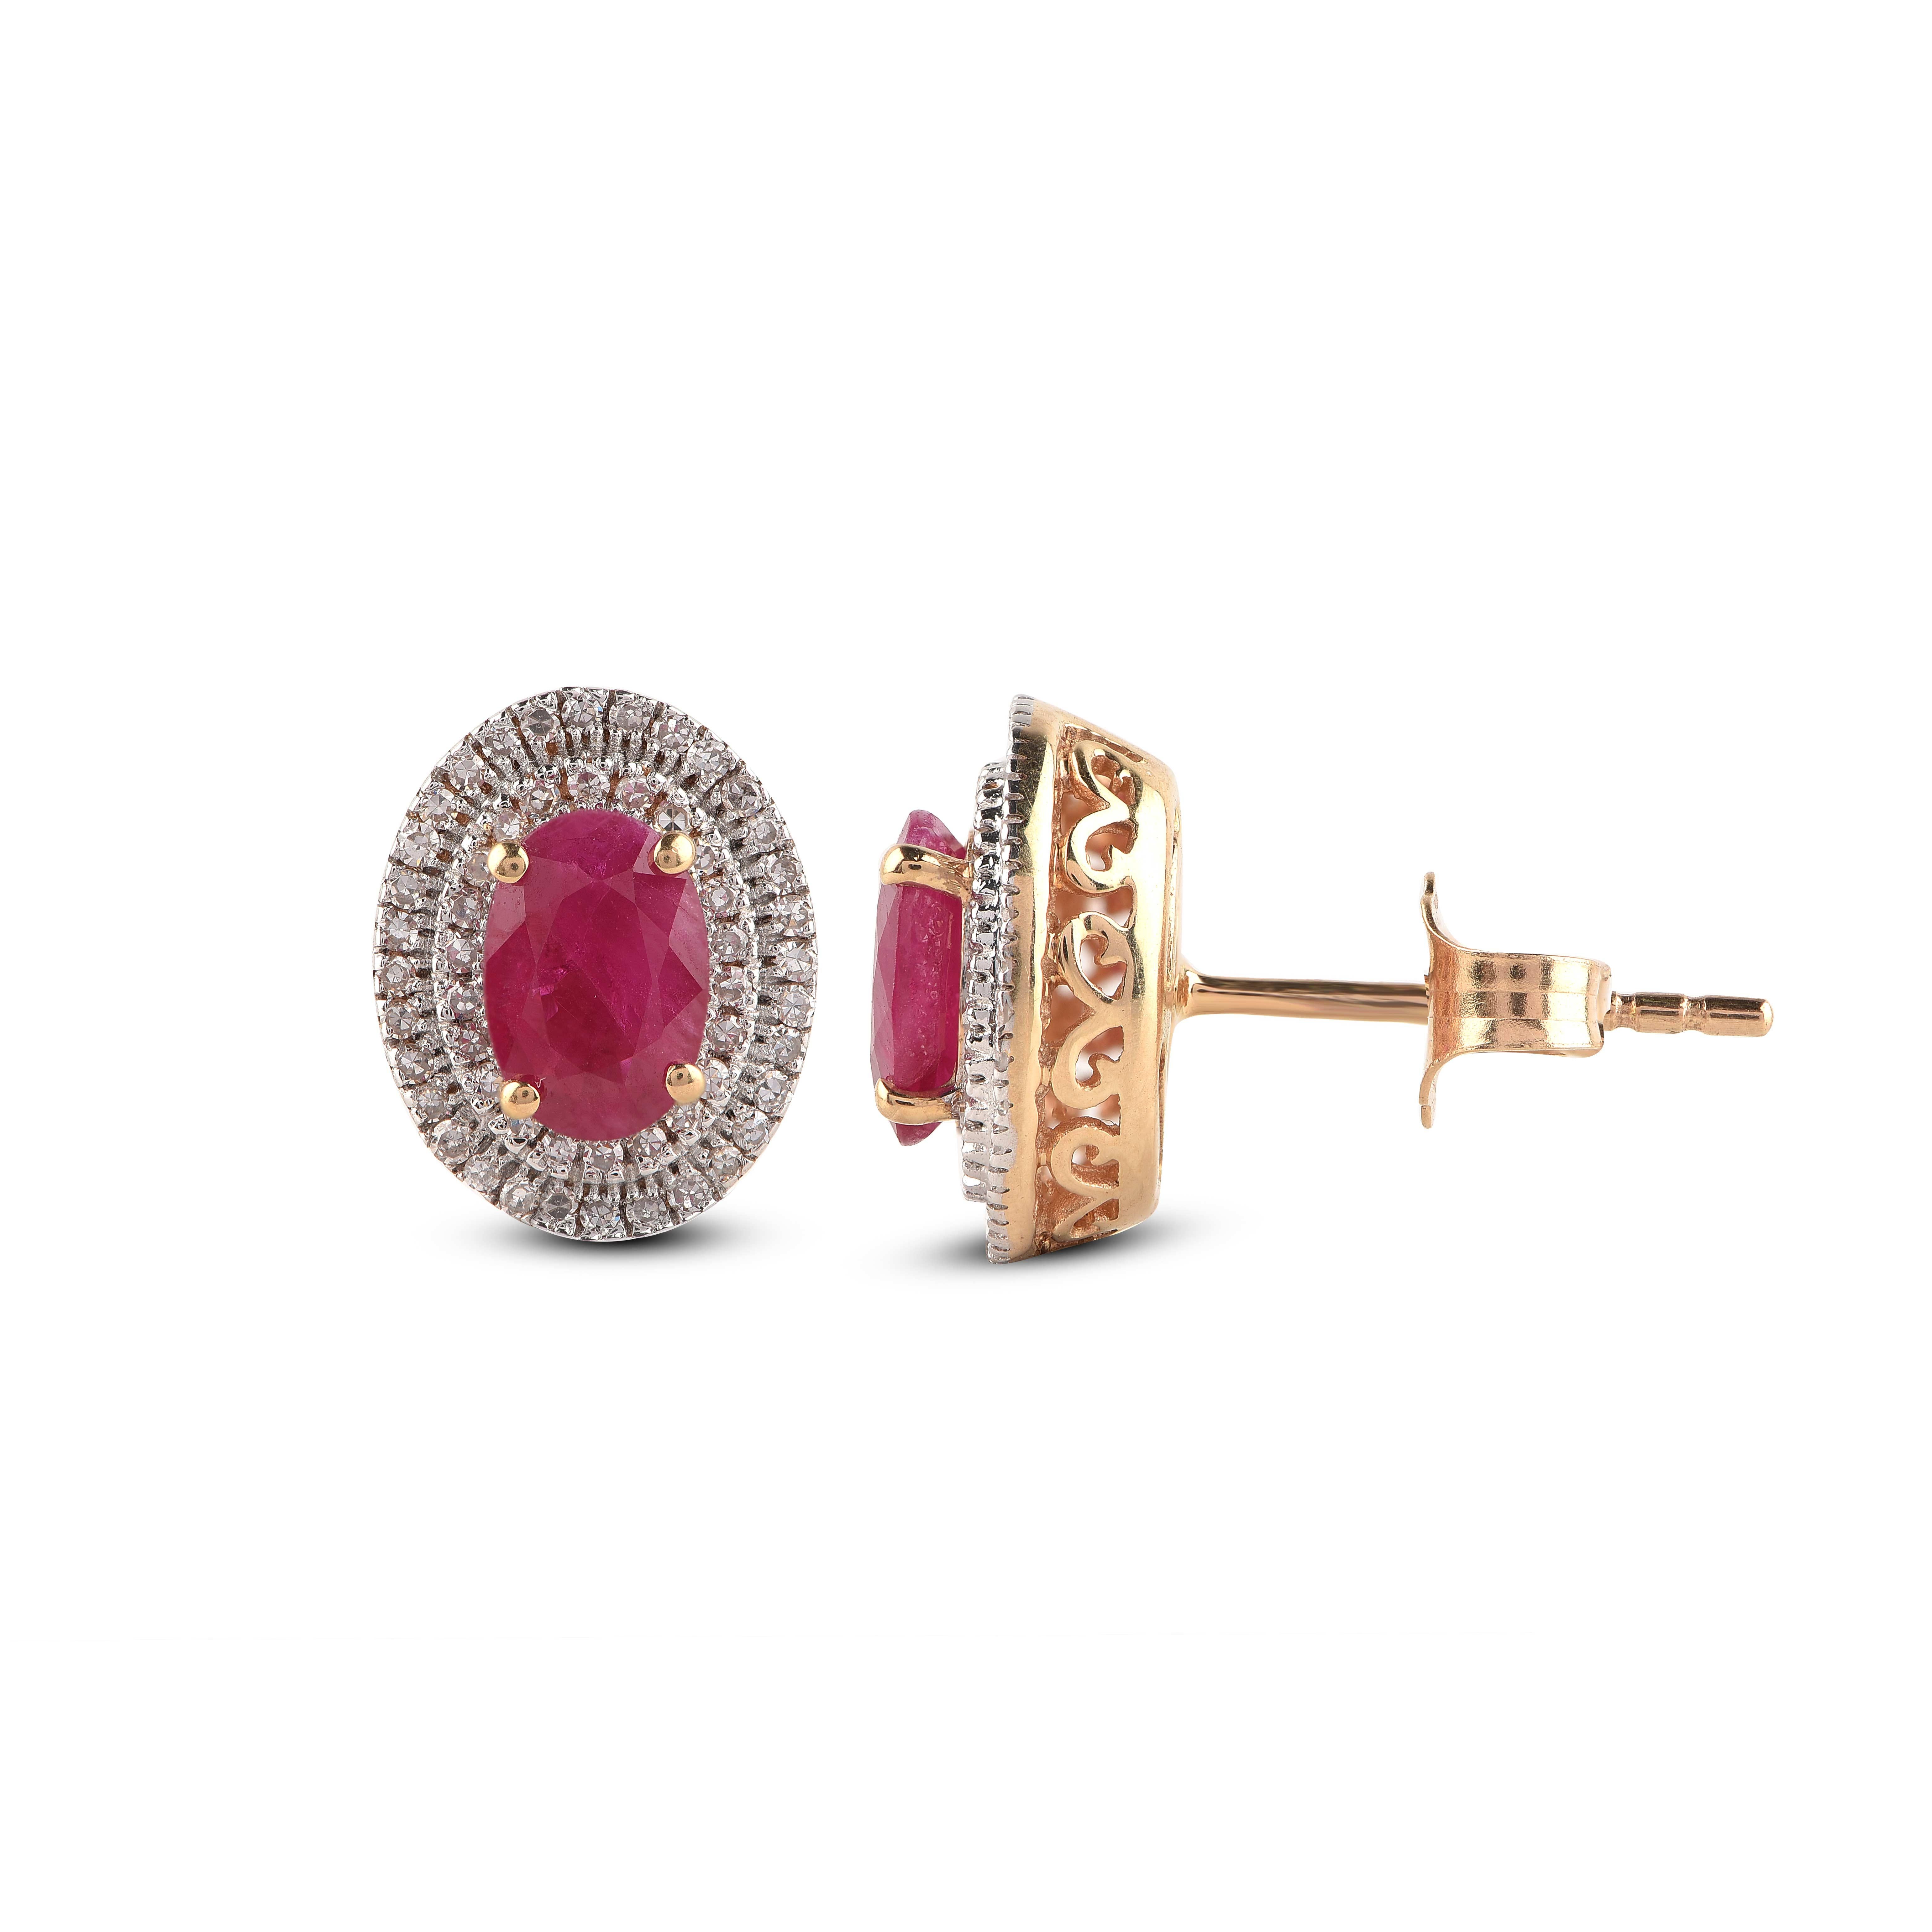 These dazzling earrings feature 108 brilliant-cut diamonds and 2 ruby gemstones embedded beautifully in prong and micro-prong setting. These ruby earrings are crafted in 14-karat yellow gold. The diamonds are graded H-I Color, I1-2 Clarity. 

Metal